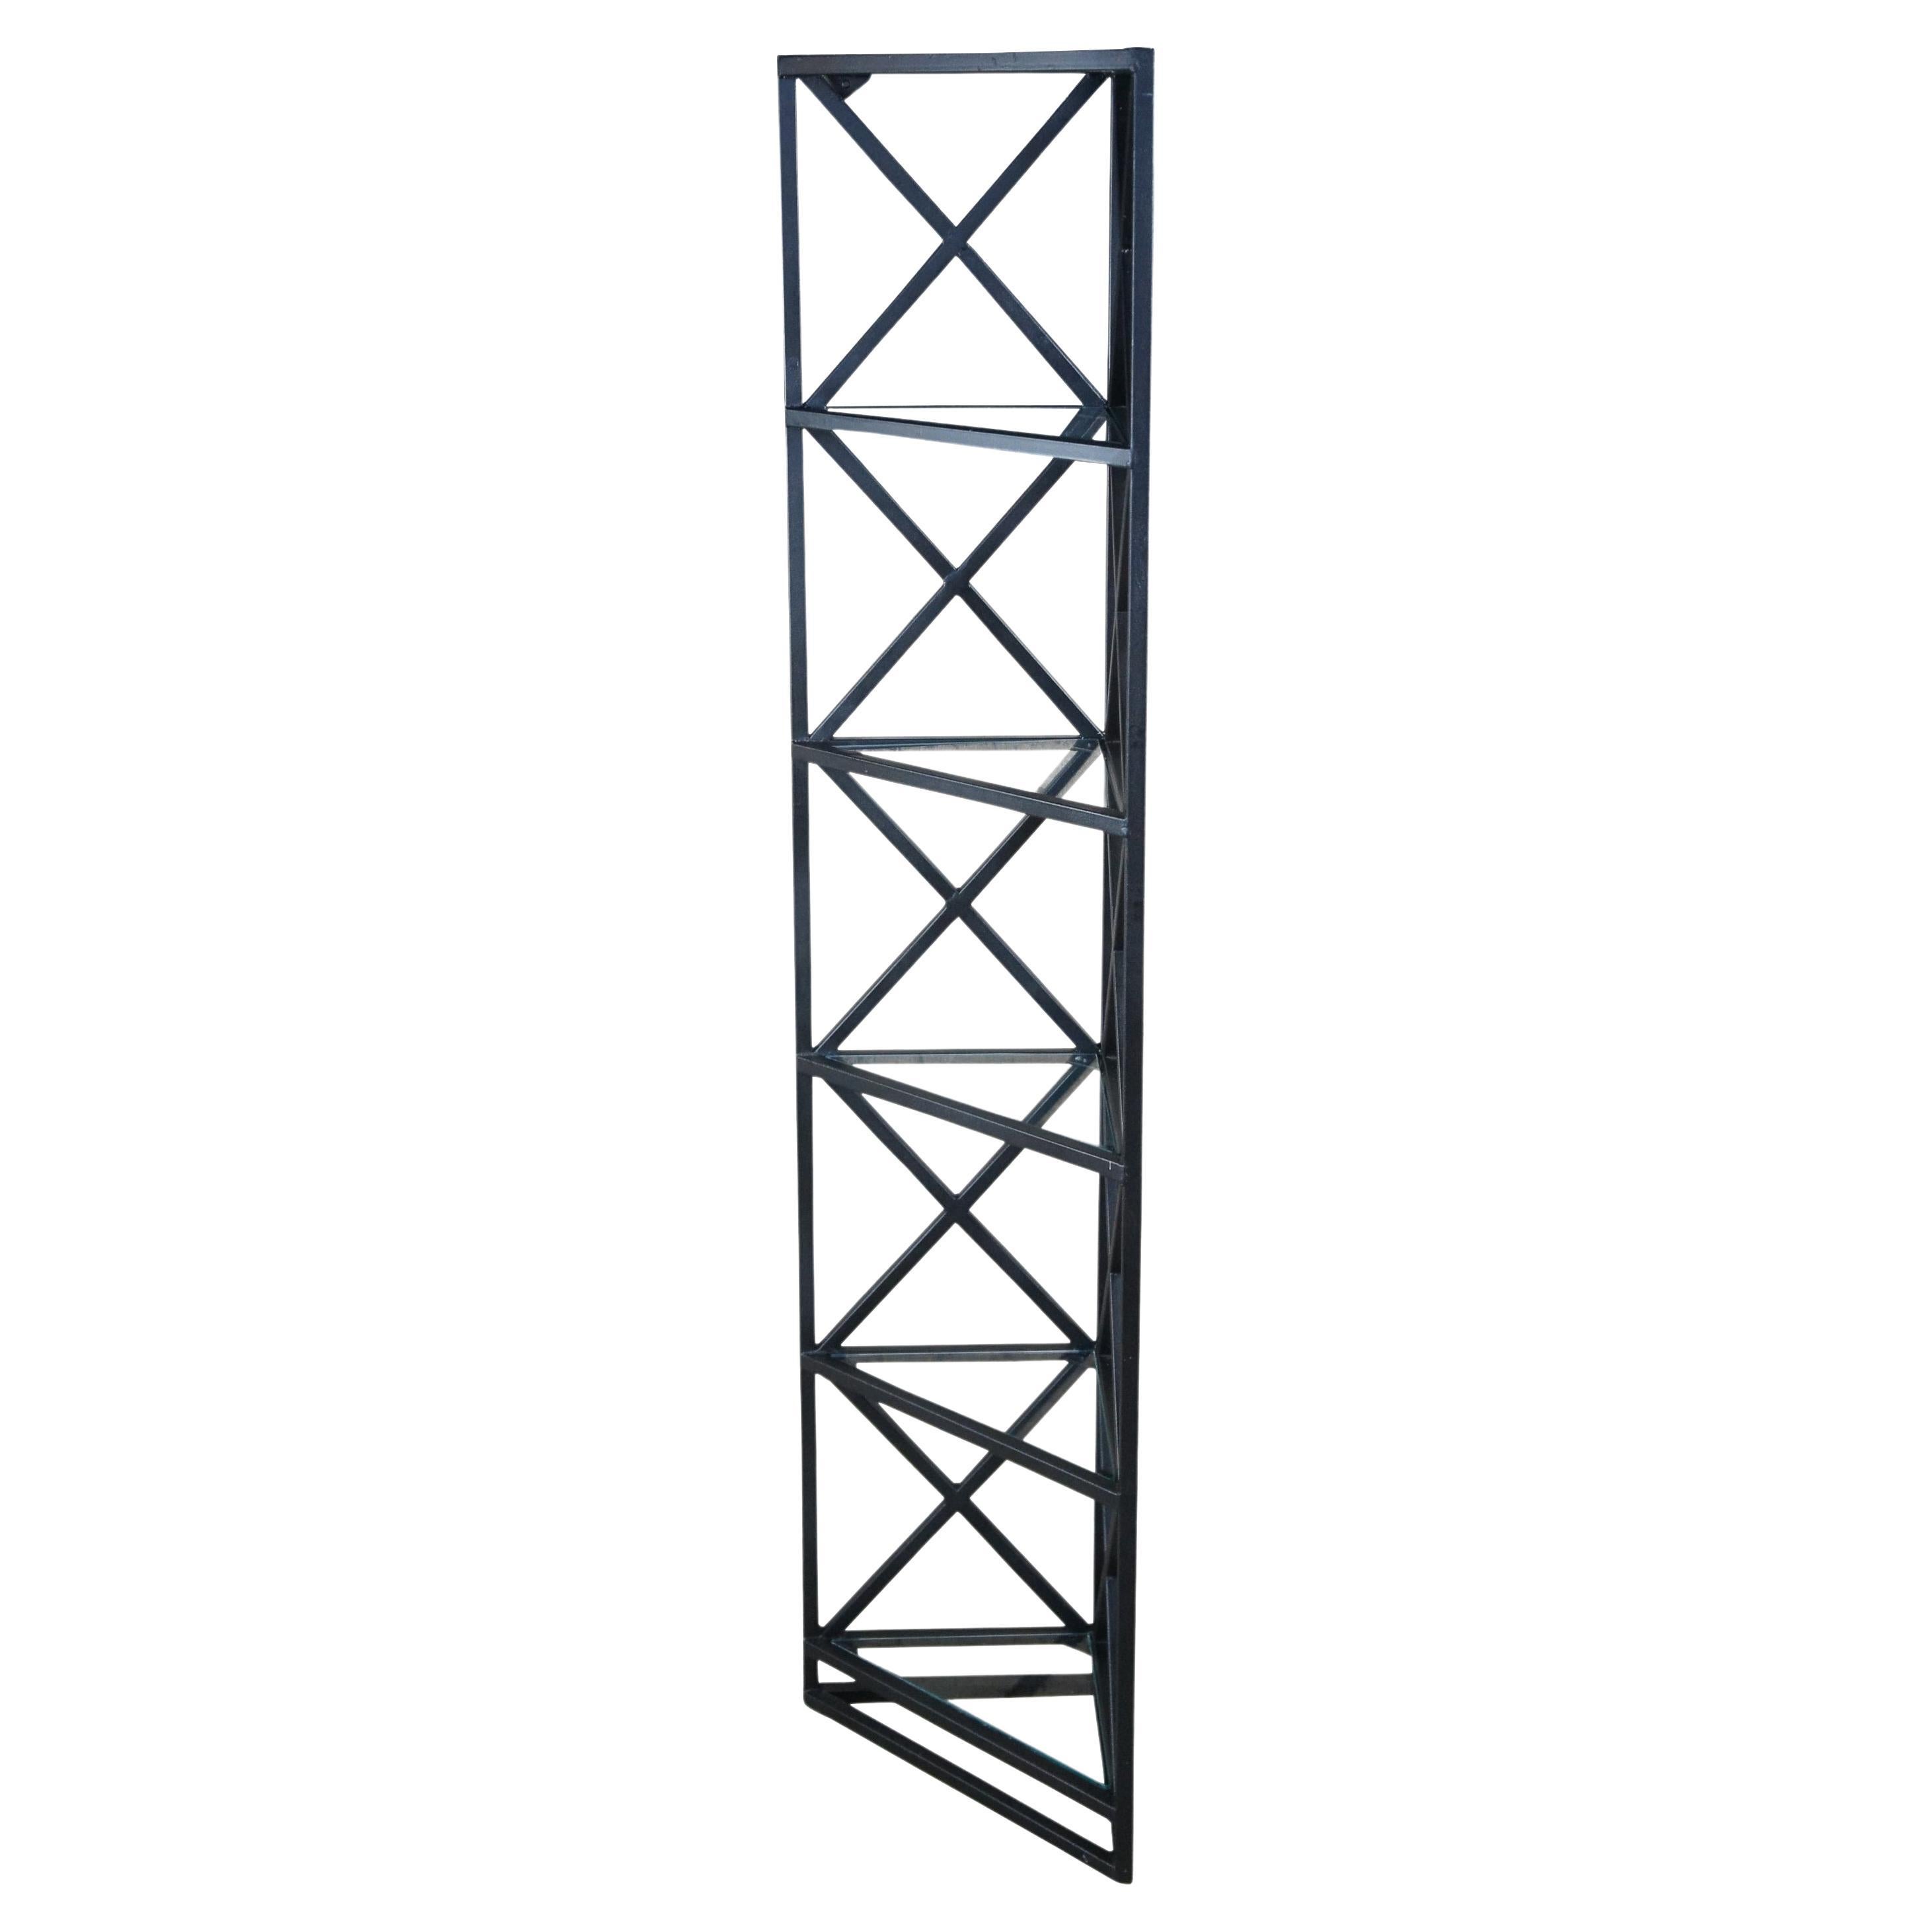 An art deco style triangular geometric corner shelf. Features tempered glass shelves. Brackets along the top allow it to be mounted to the wall. Measures: 63